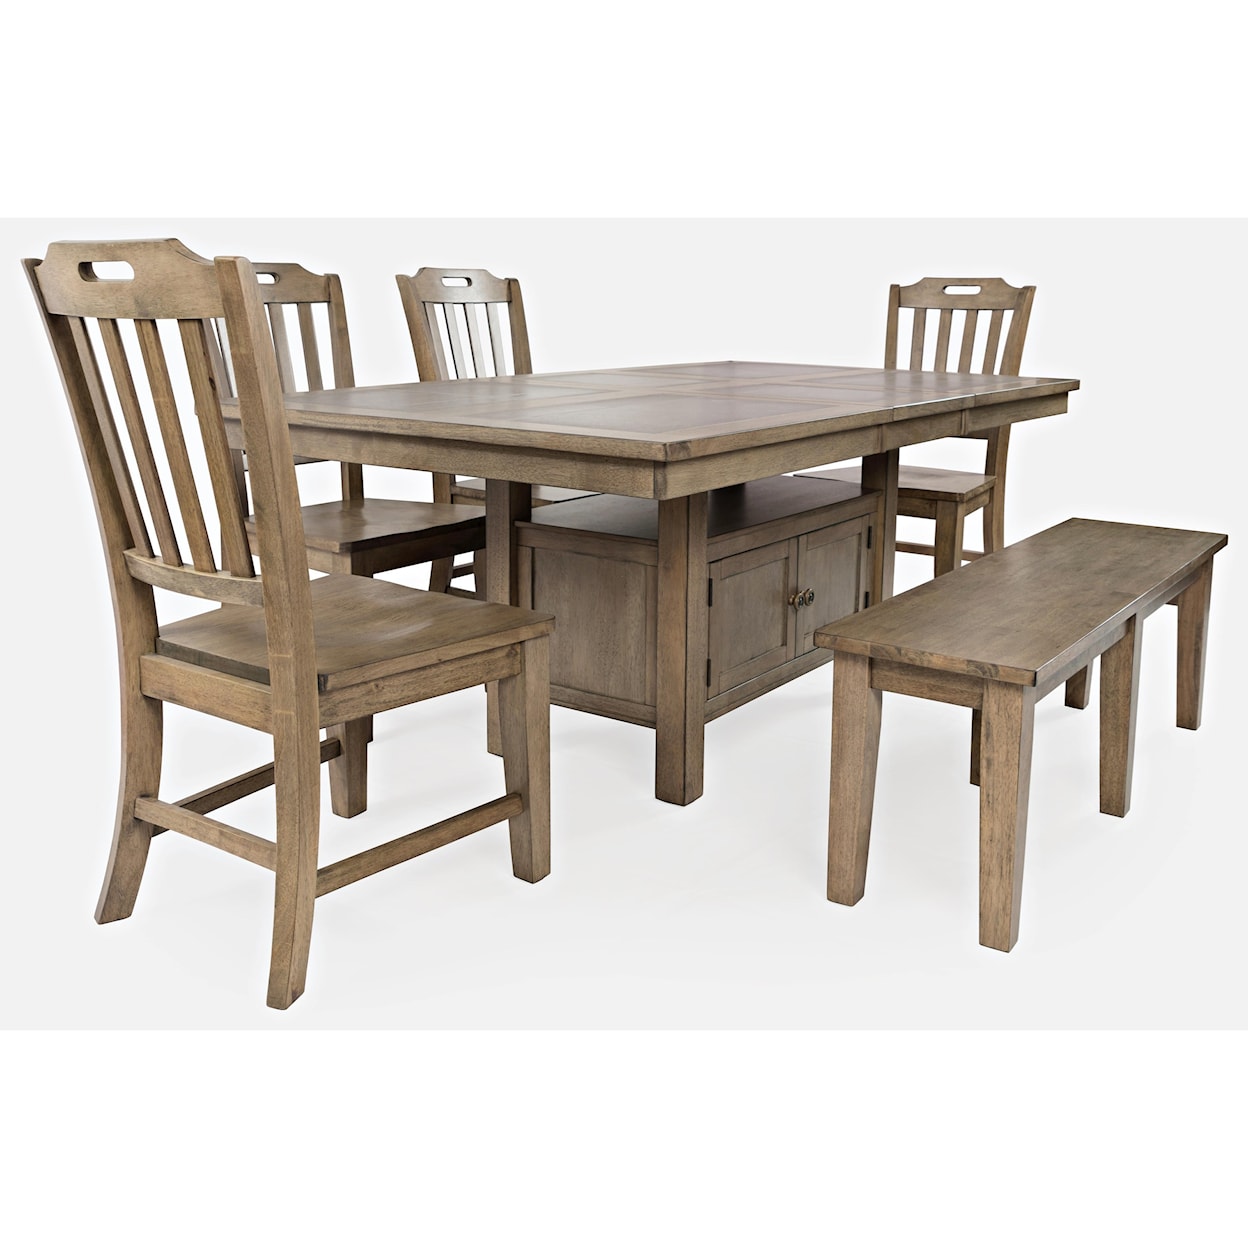 Jofran Prescott Park 6-Piece Dining Table and Chair Set